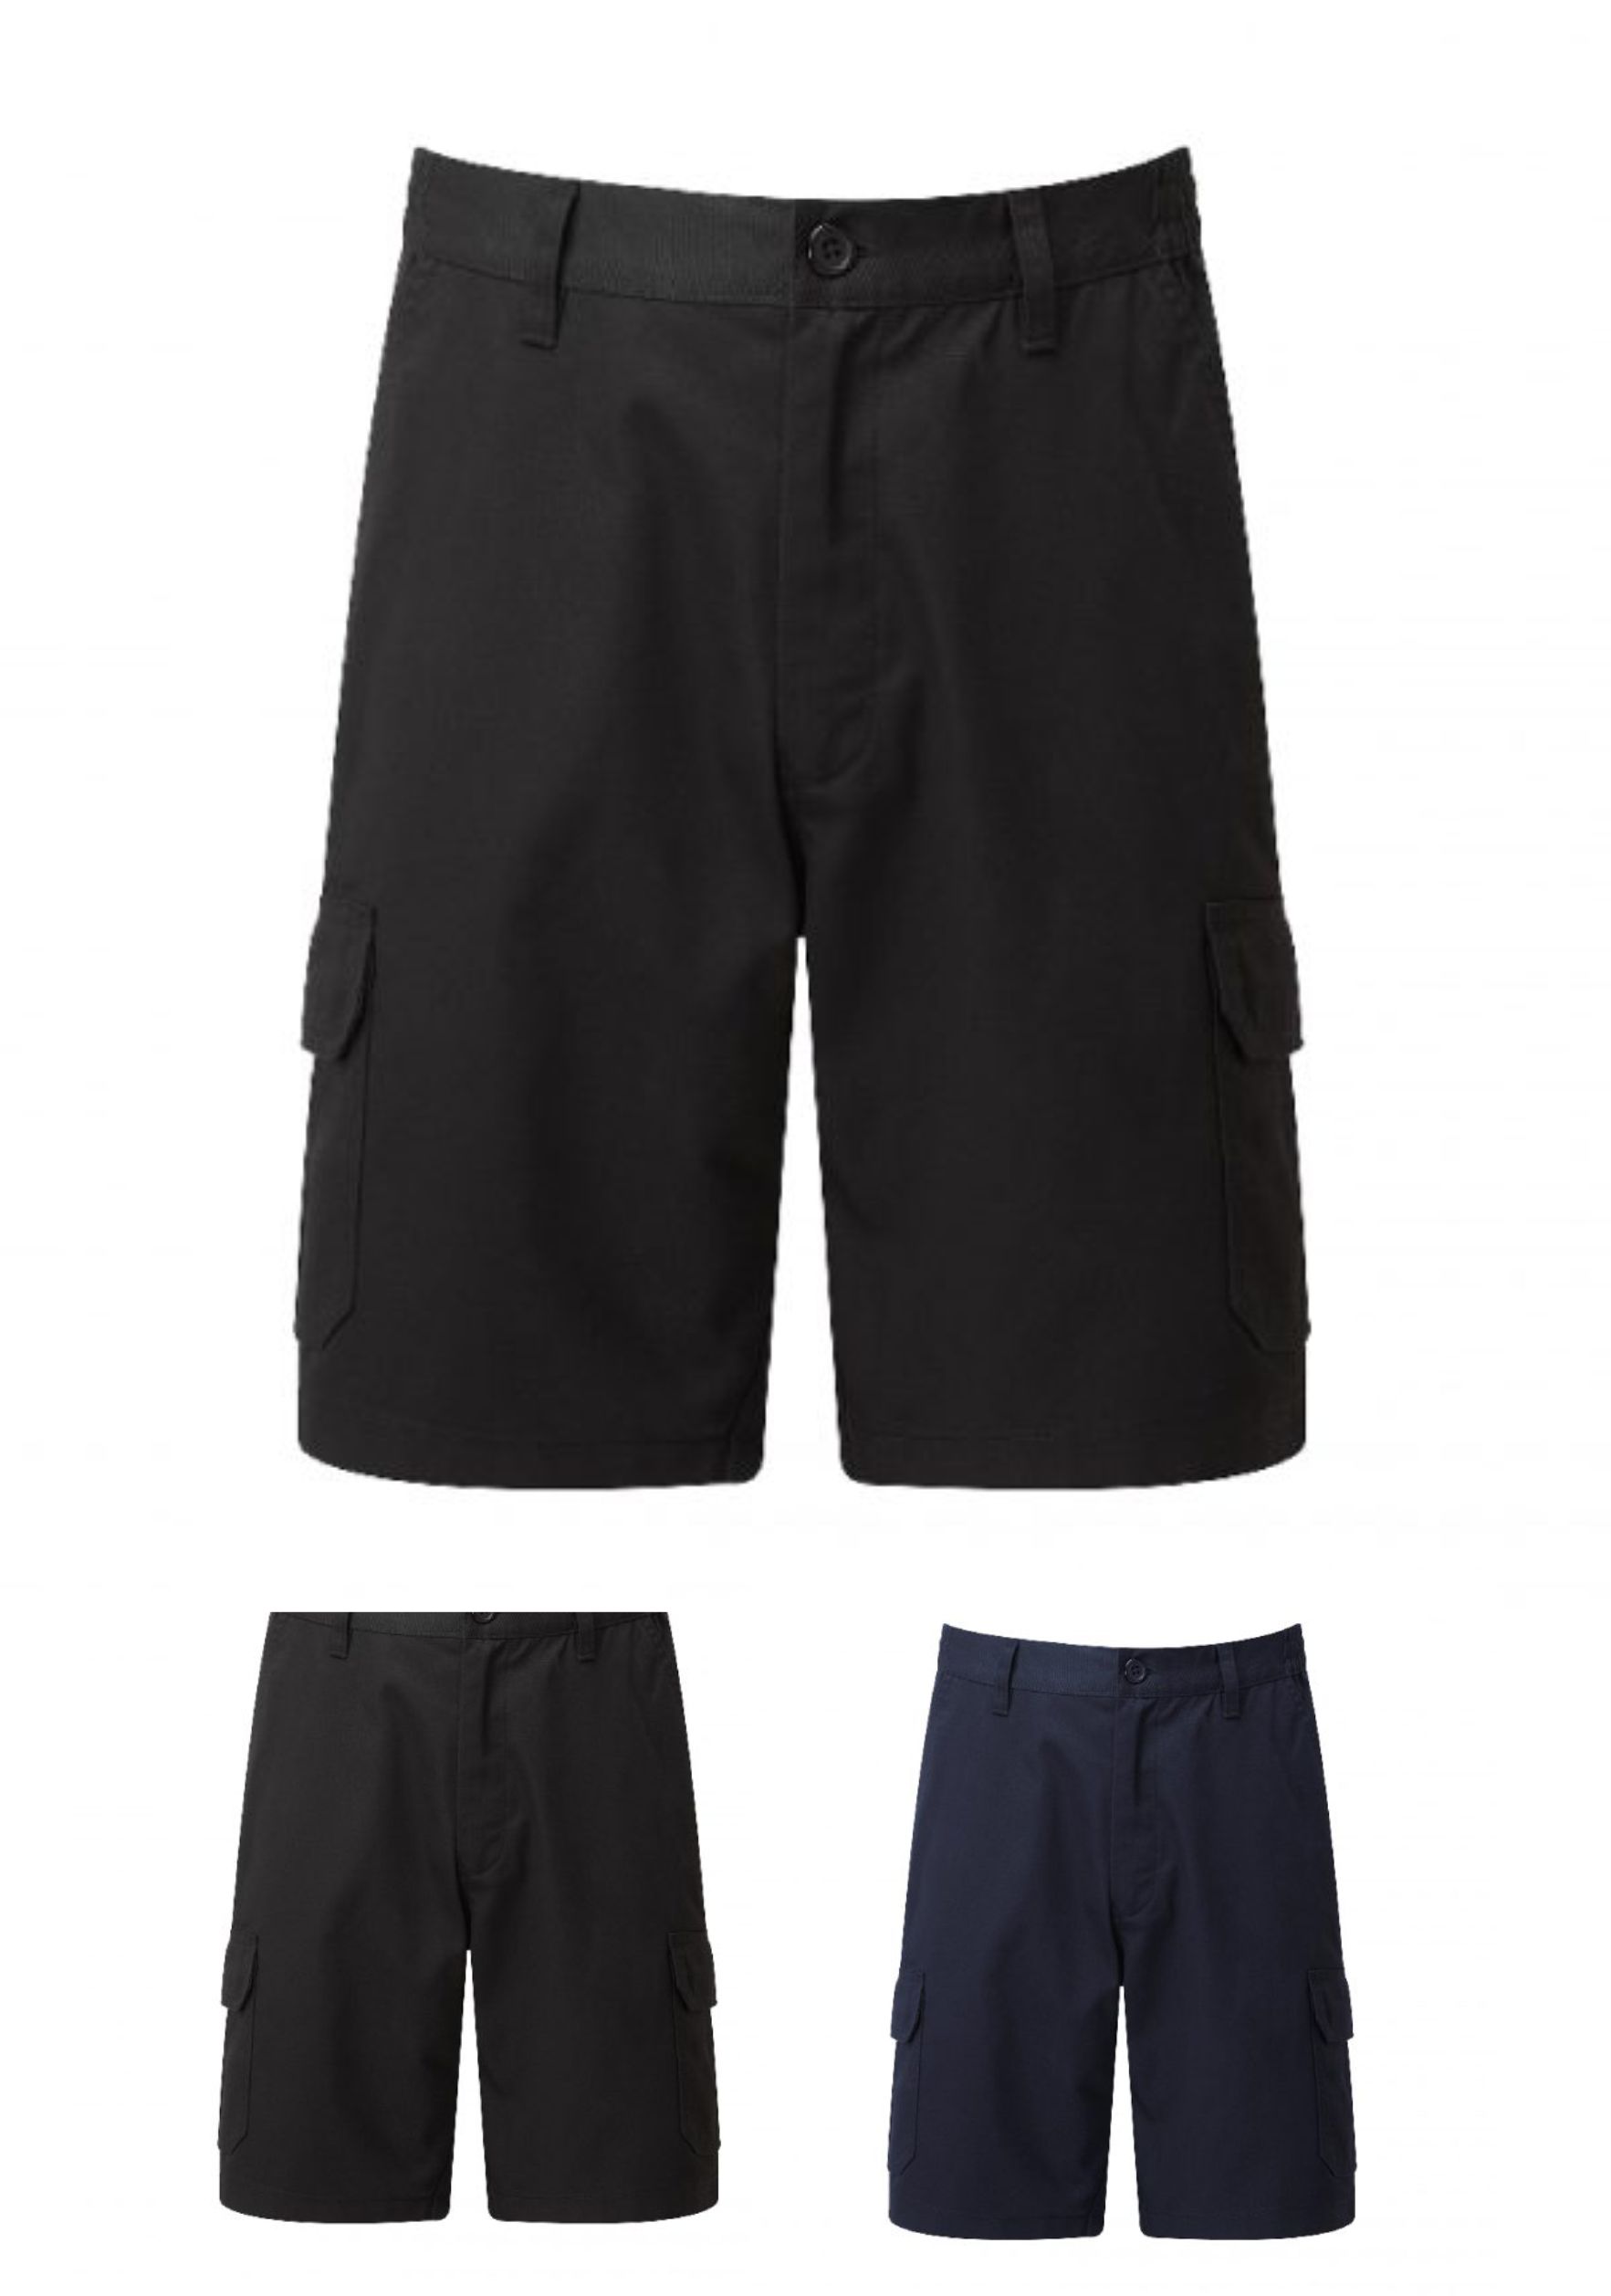 816 Fort Workforce Shorts - Click Image to Close